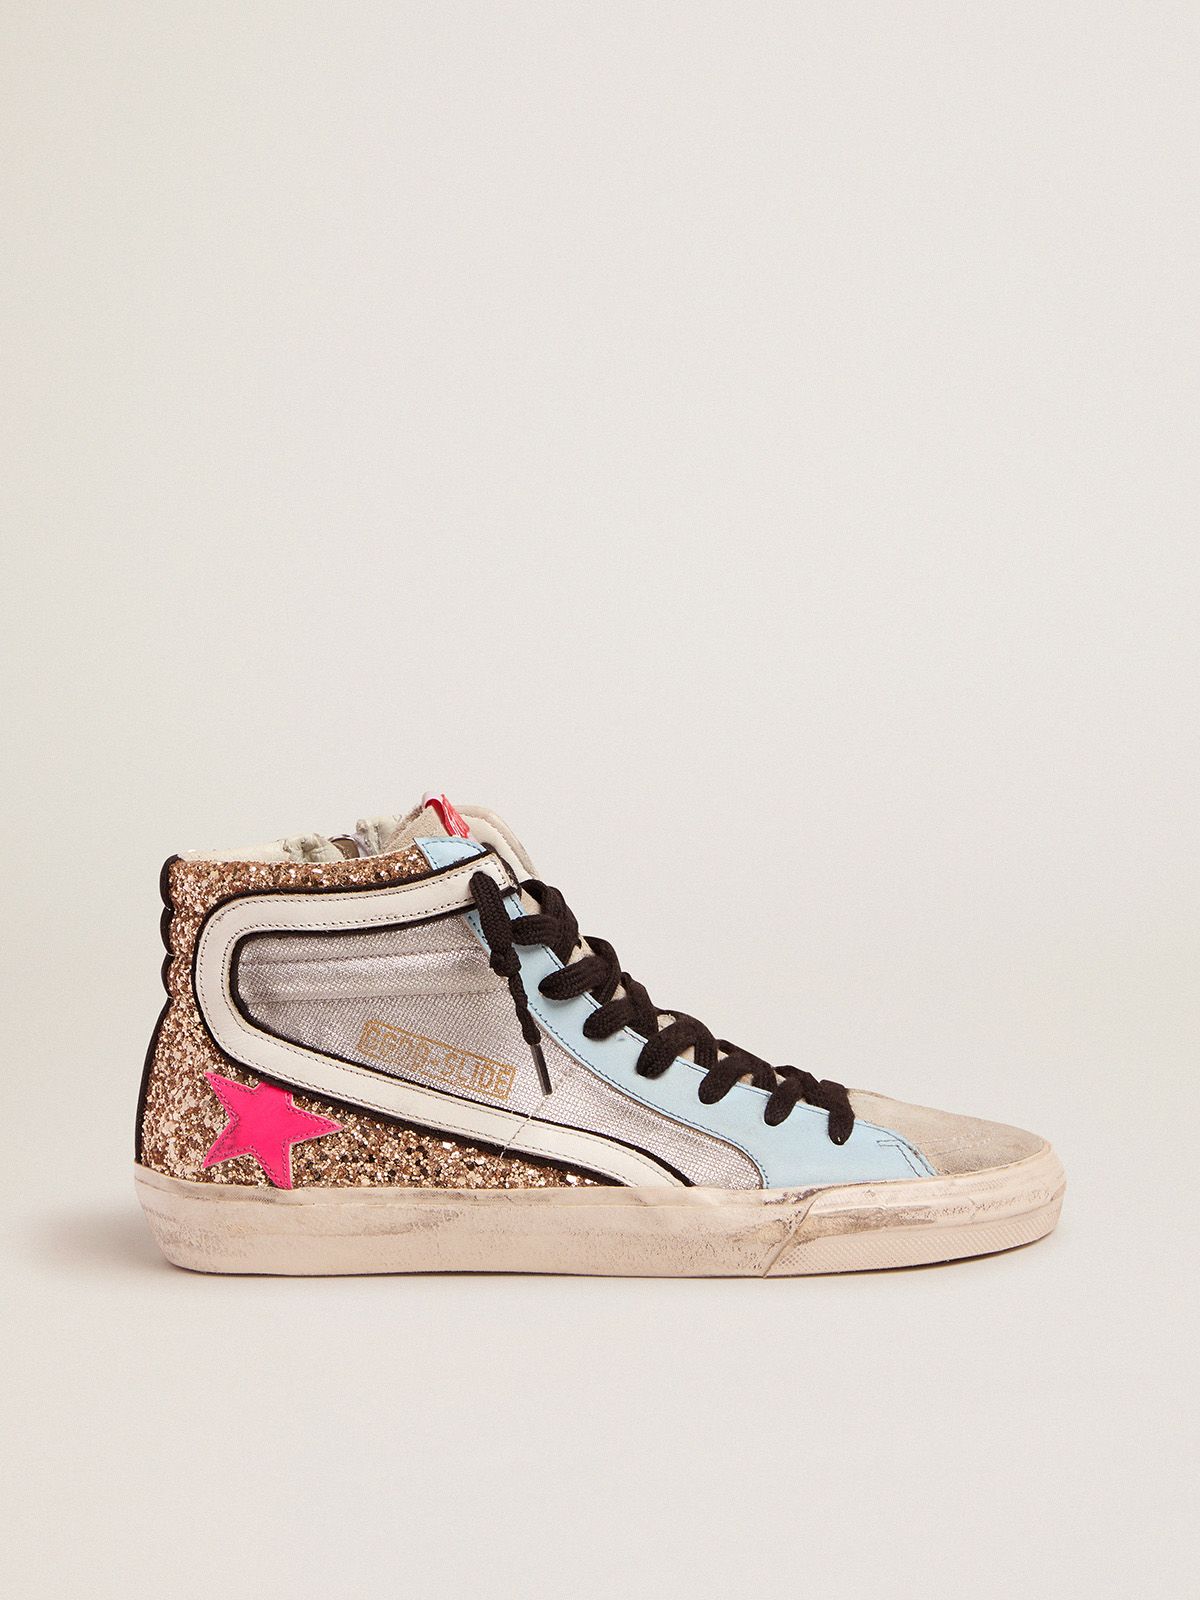 Slide LTD sneakers with glitter and fuchsia star